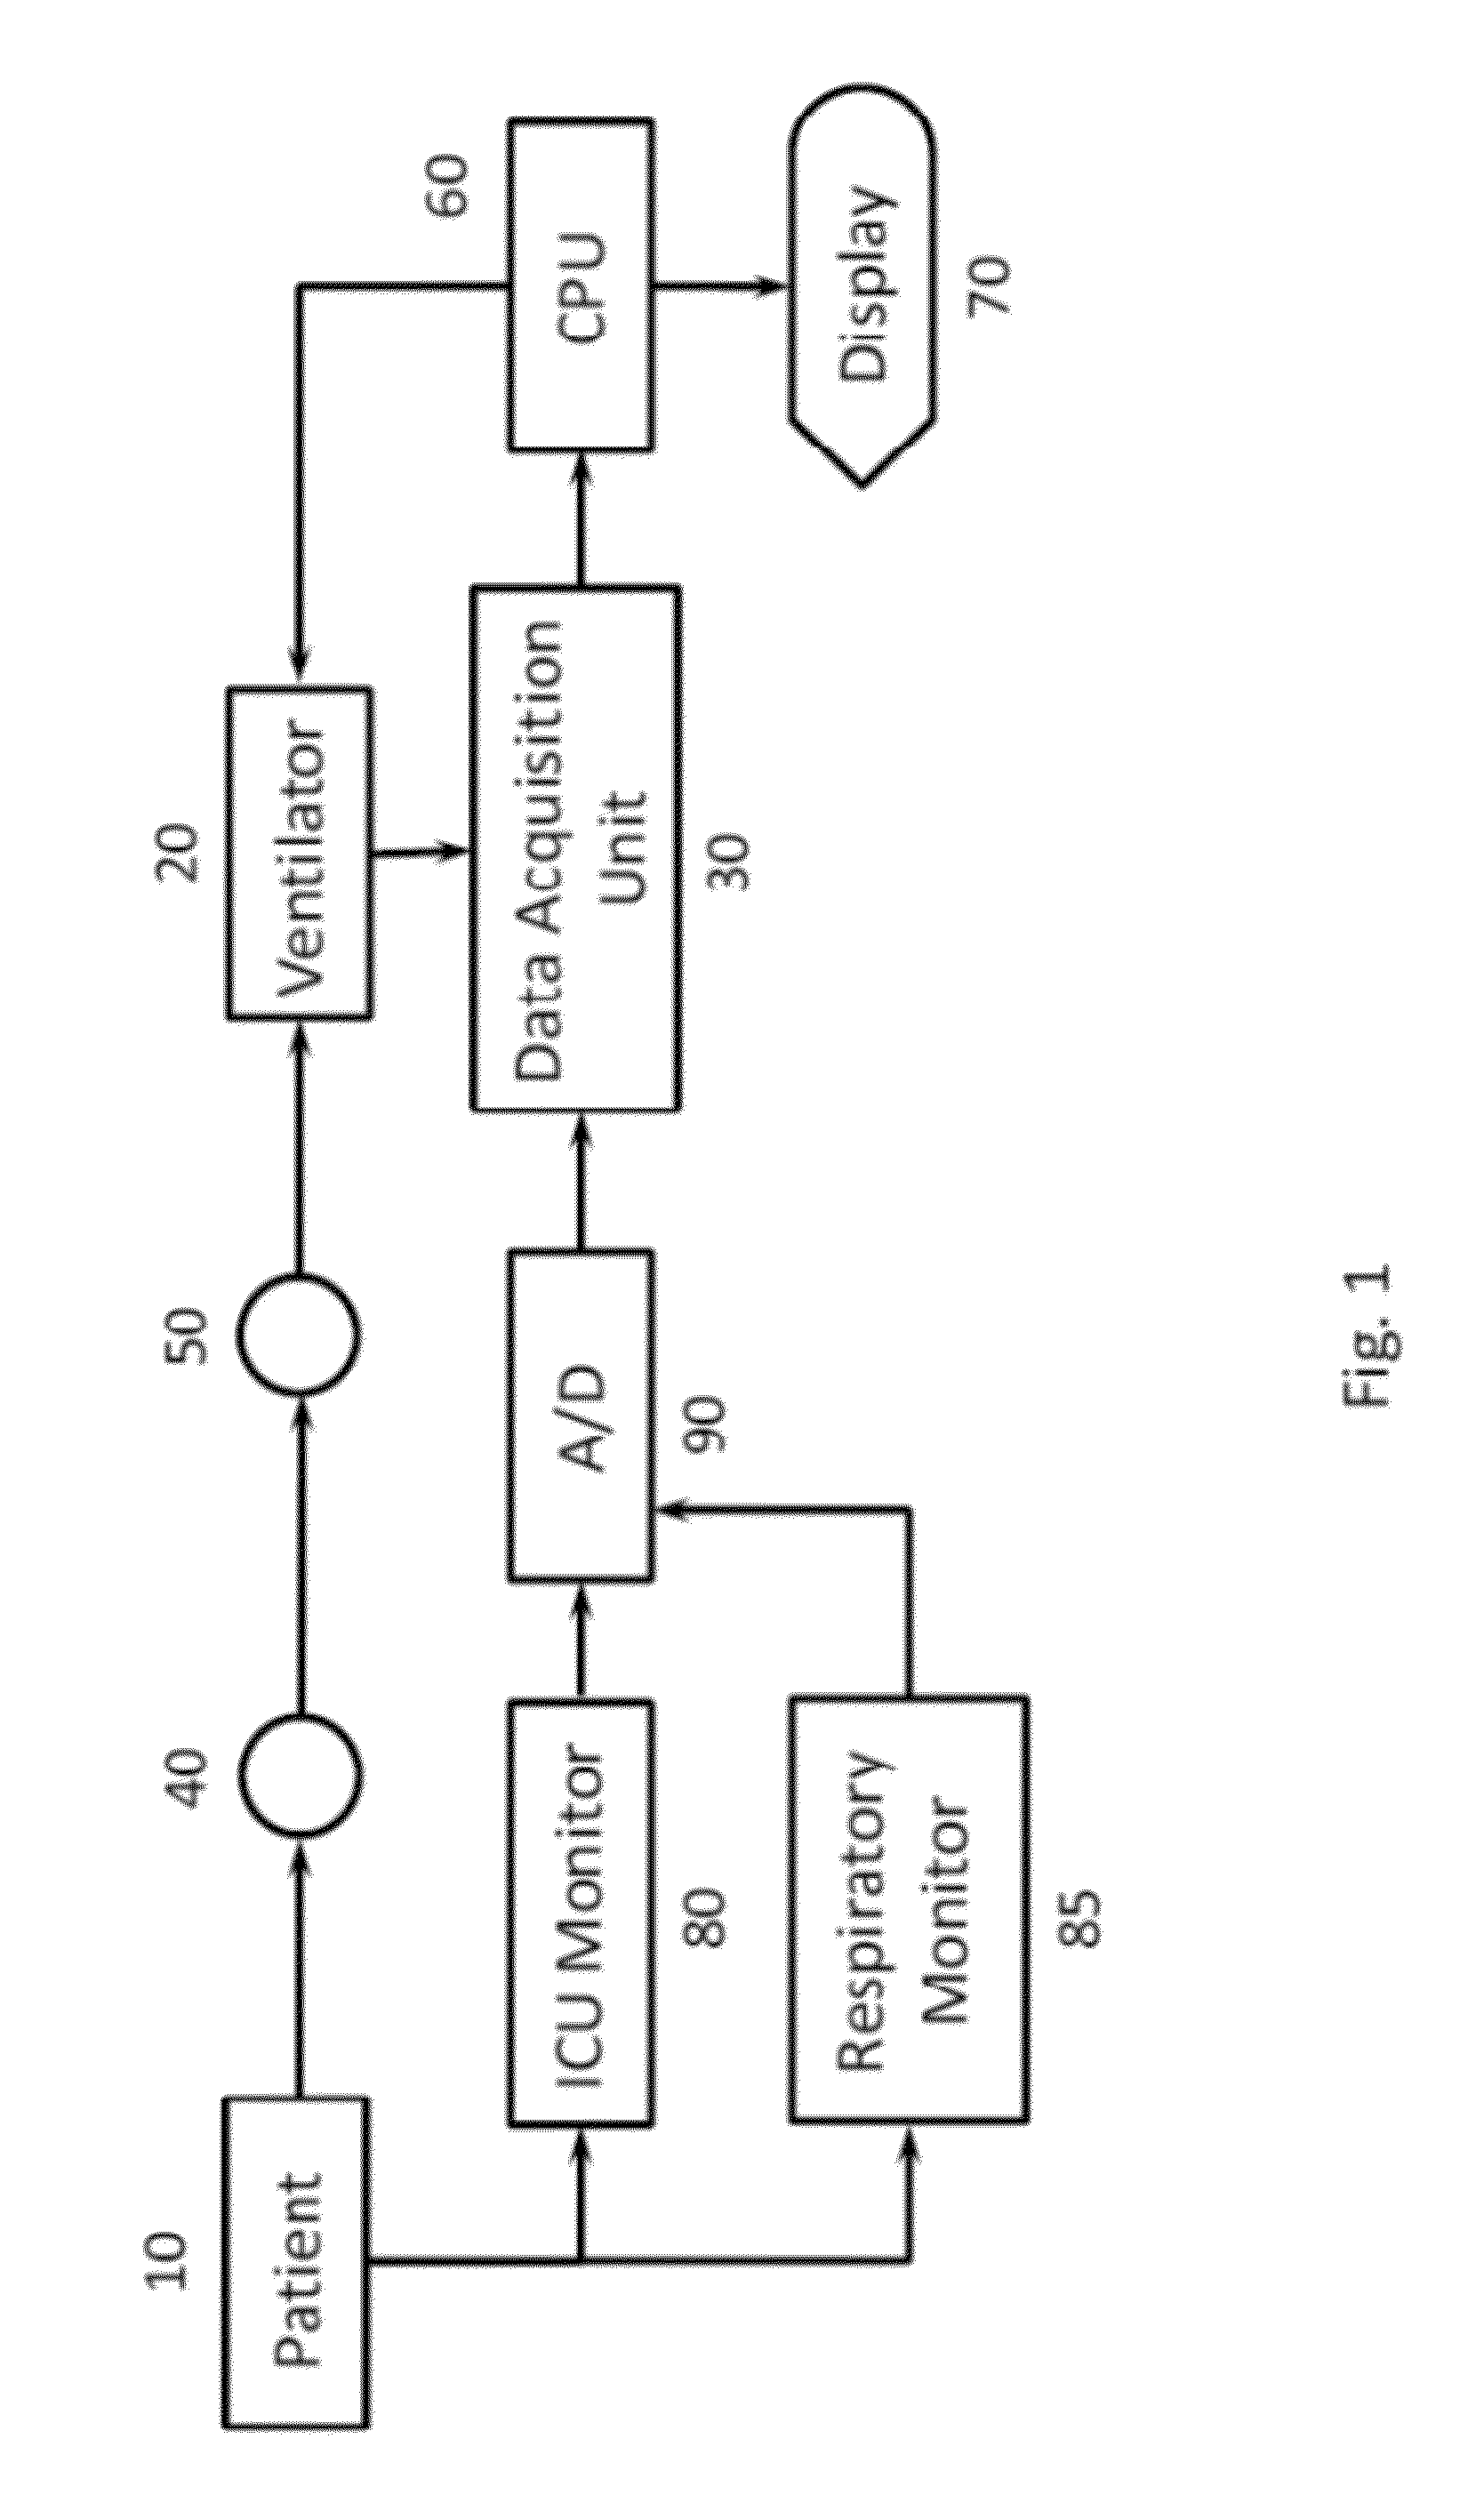 Method and system to detect respiratory asynchrony